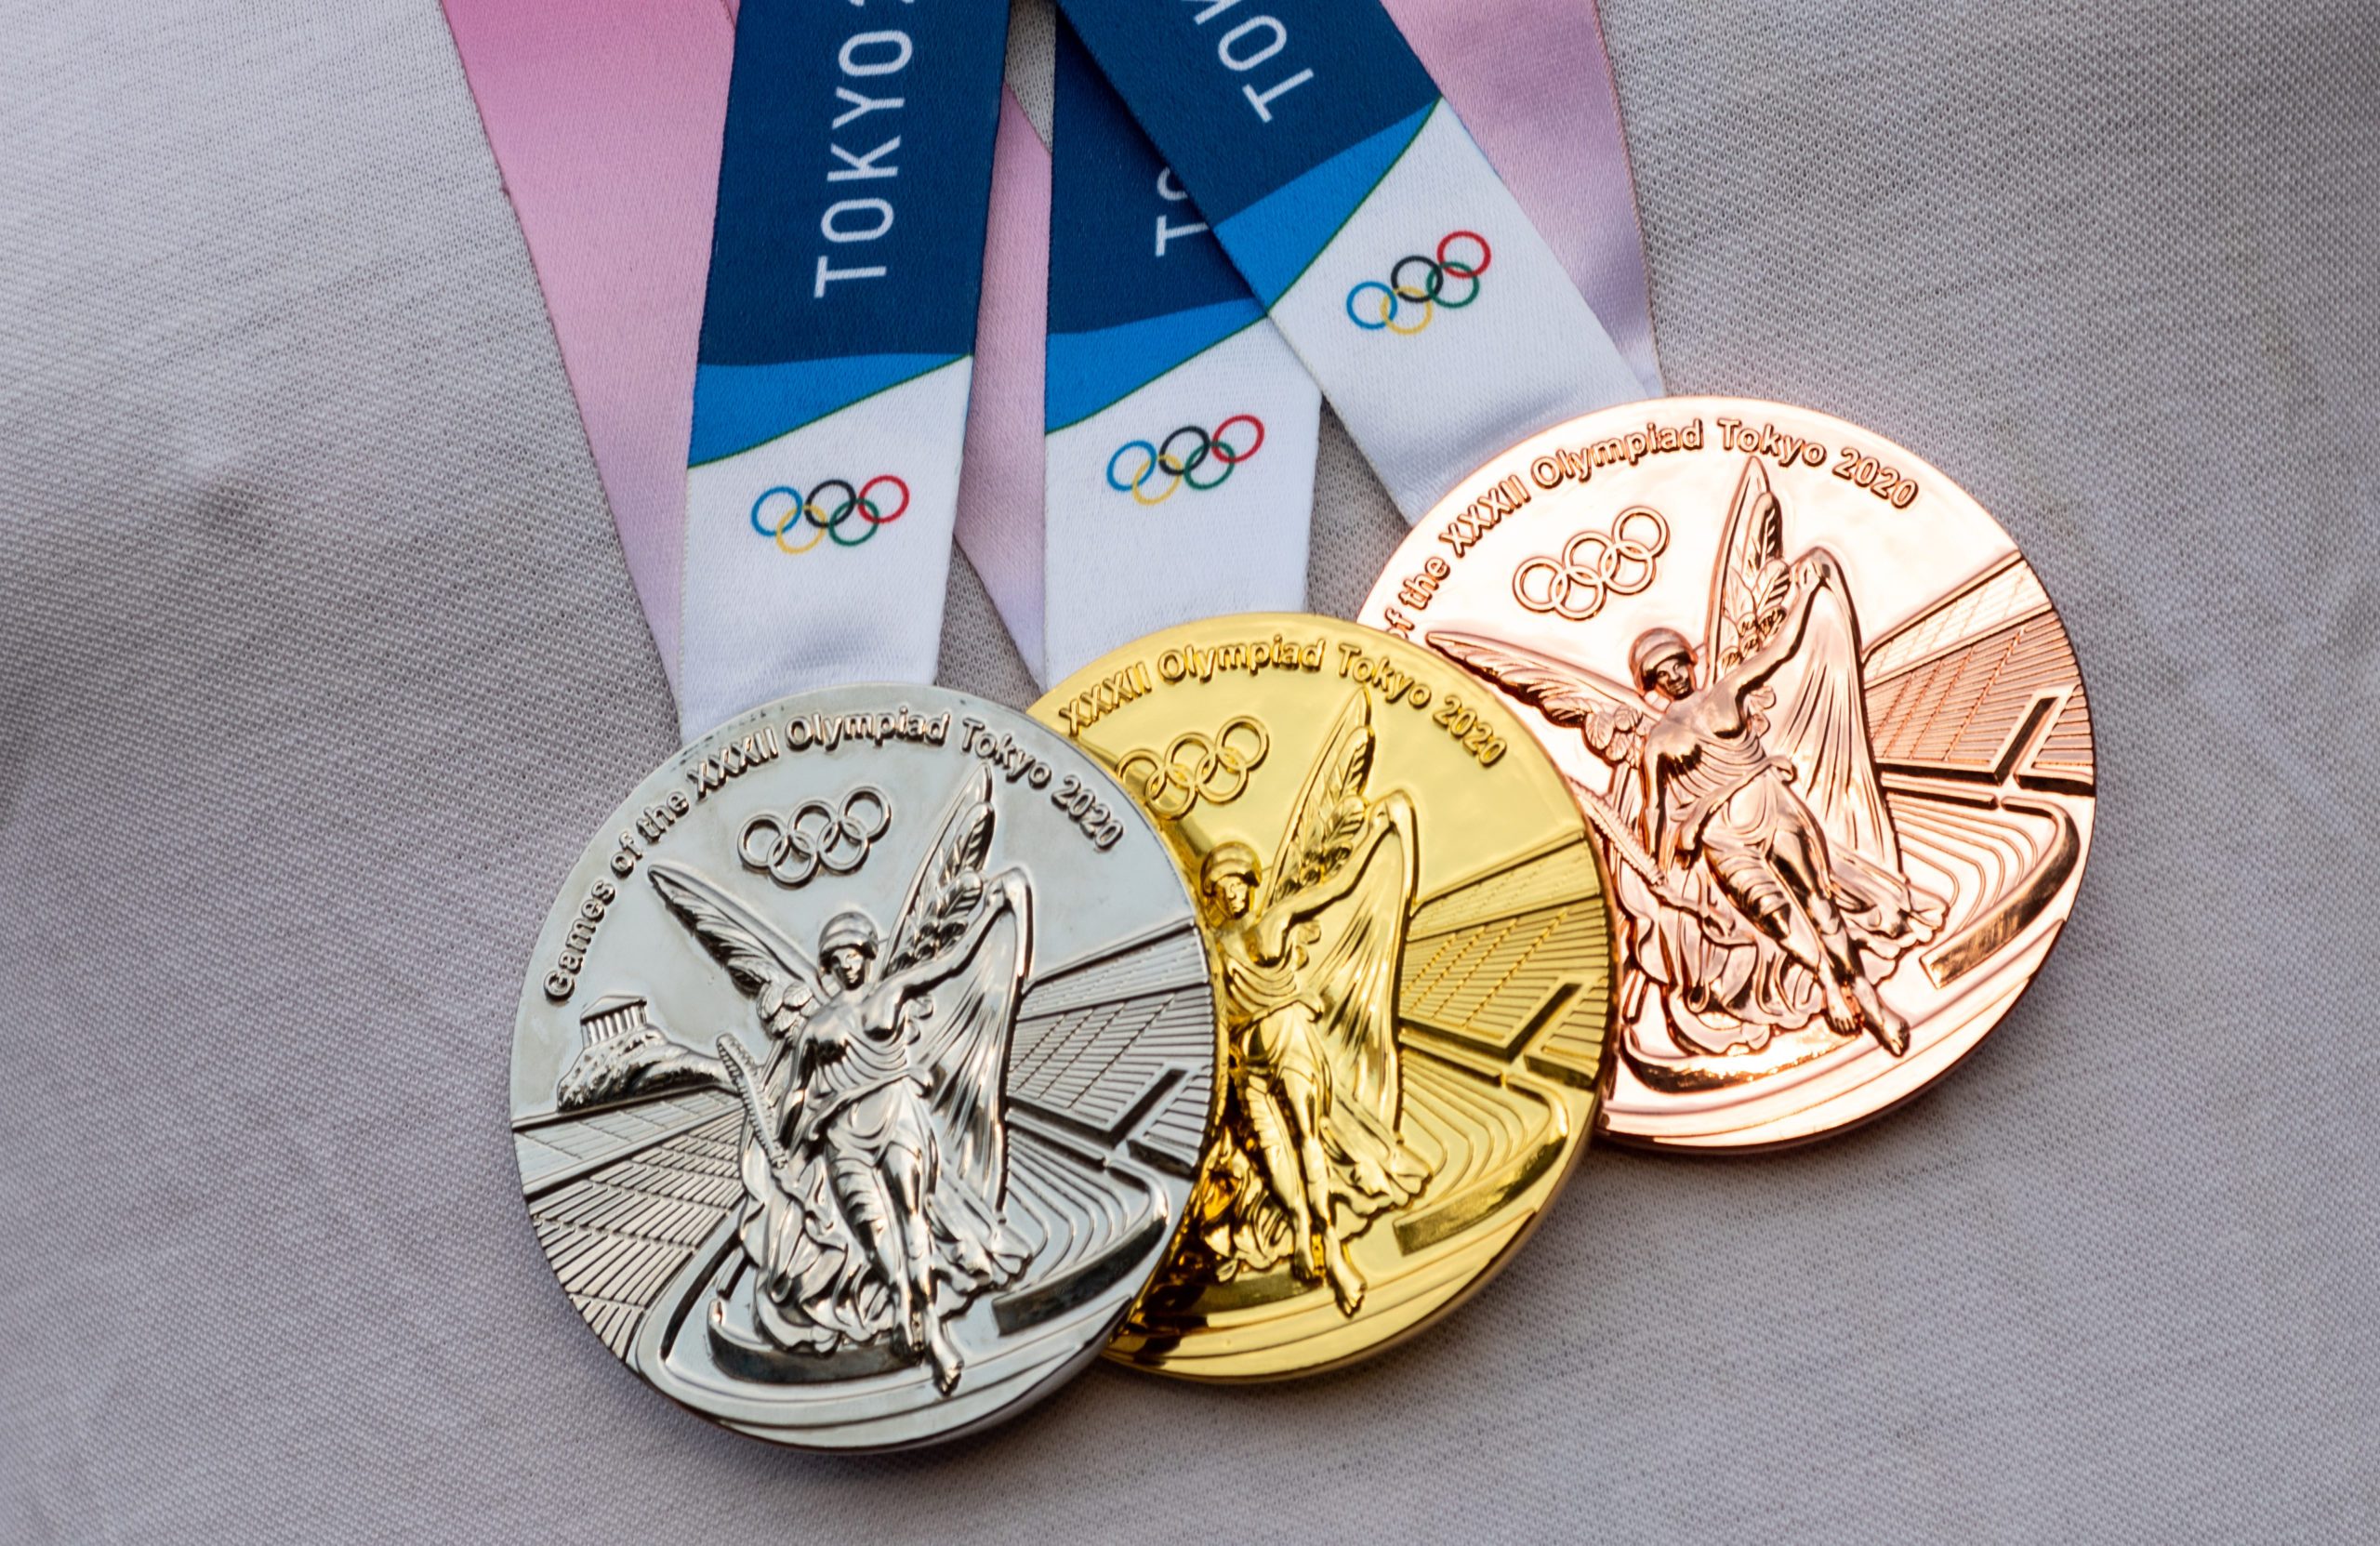 A Closer Look at Olympic Medals - The Gold, Silver, and Bronze